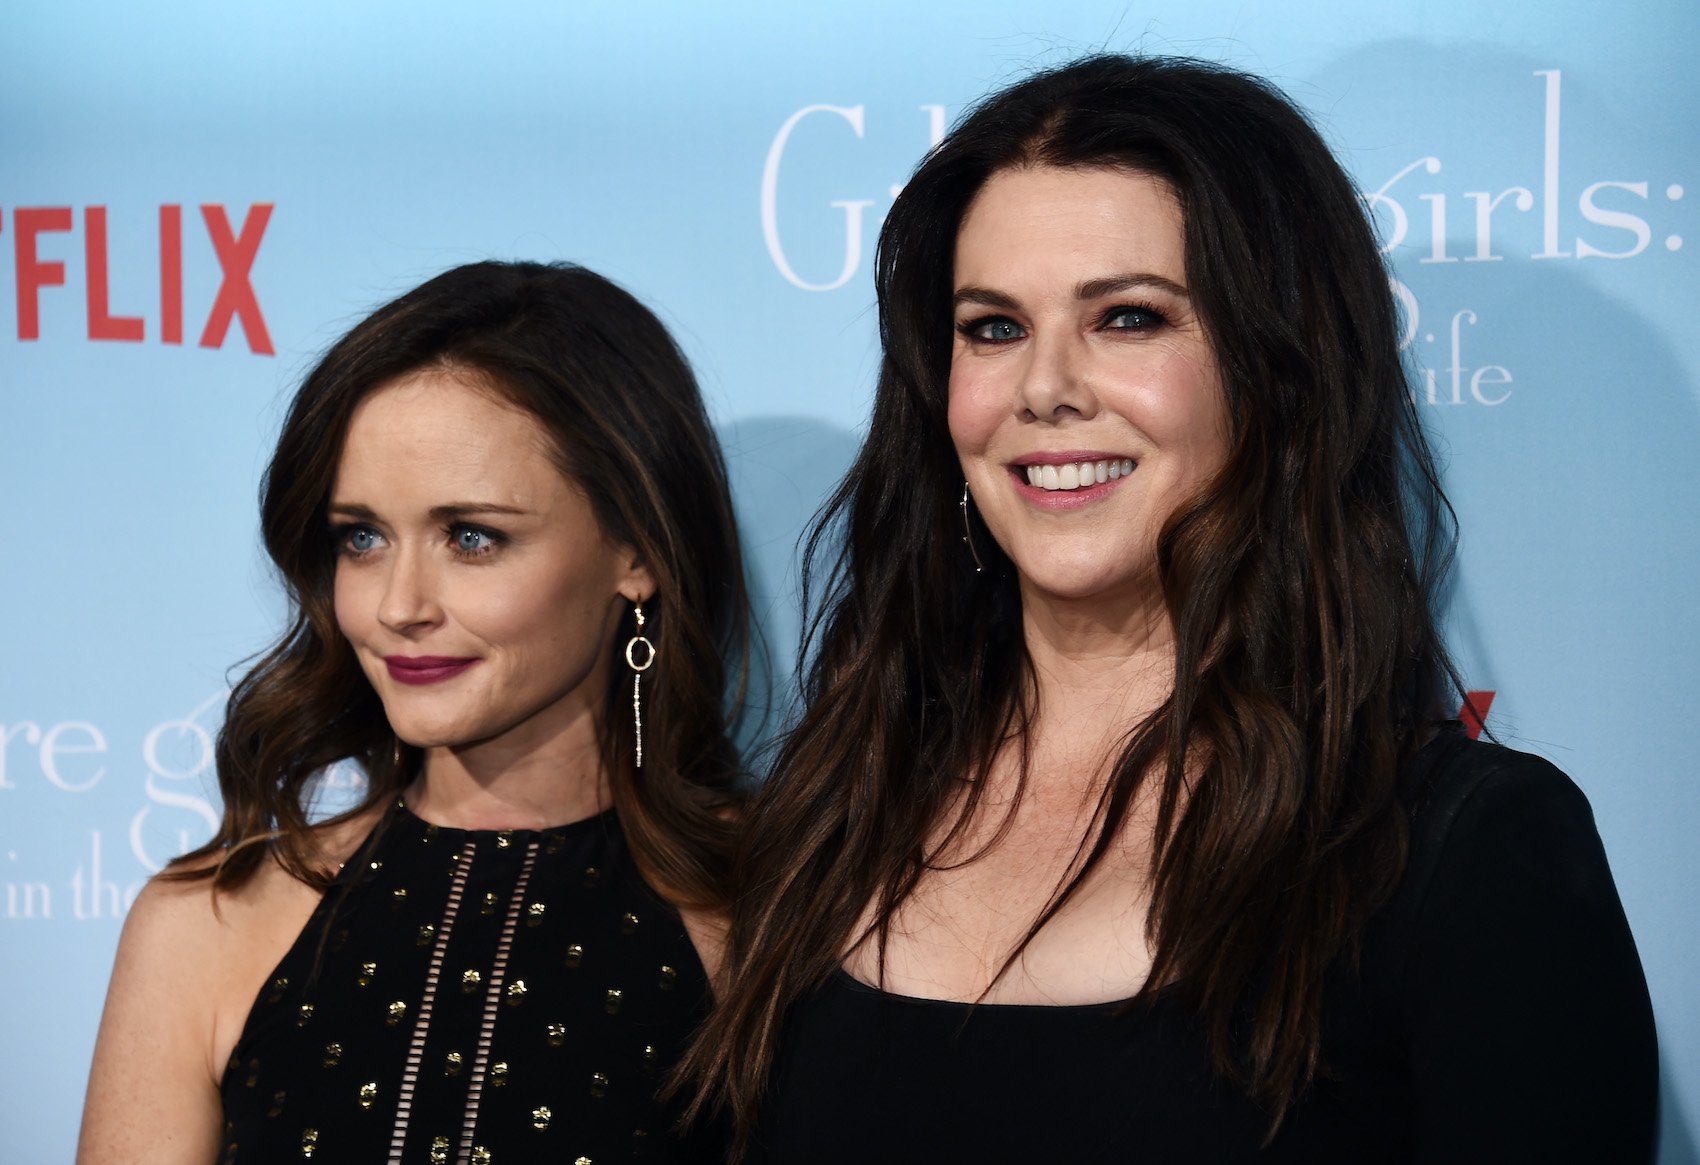 Alexis Bledel and Lauren Graham at the premiere of 'Gilmore Girls A Year in the Life'